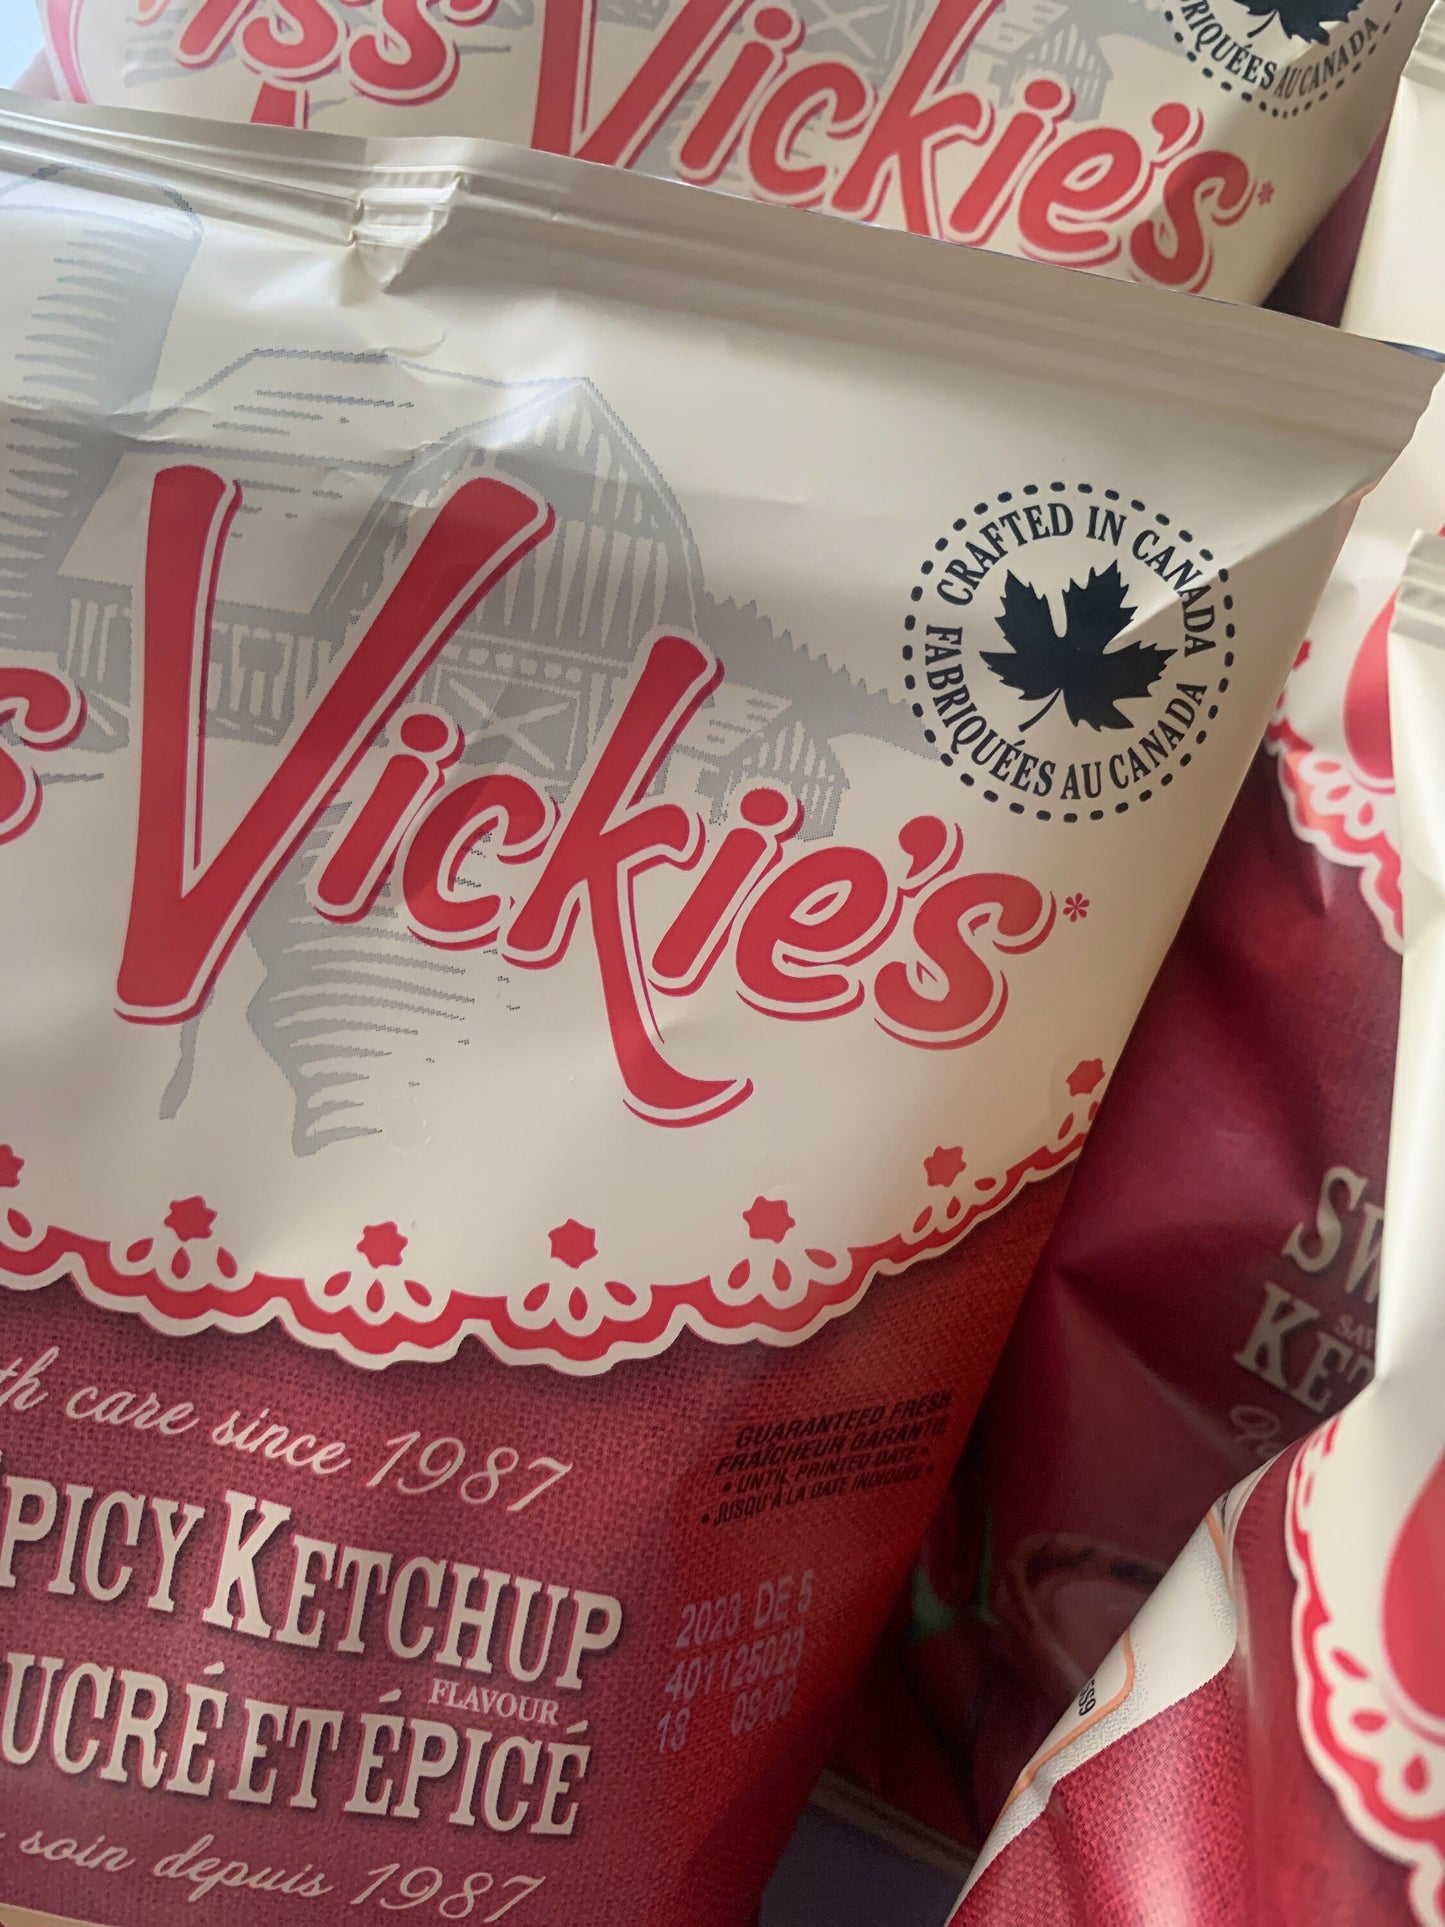 8-PACK Miss Vickies Sweet & Spicy Ketchup Chips Gift Box Canadian Chips